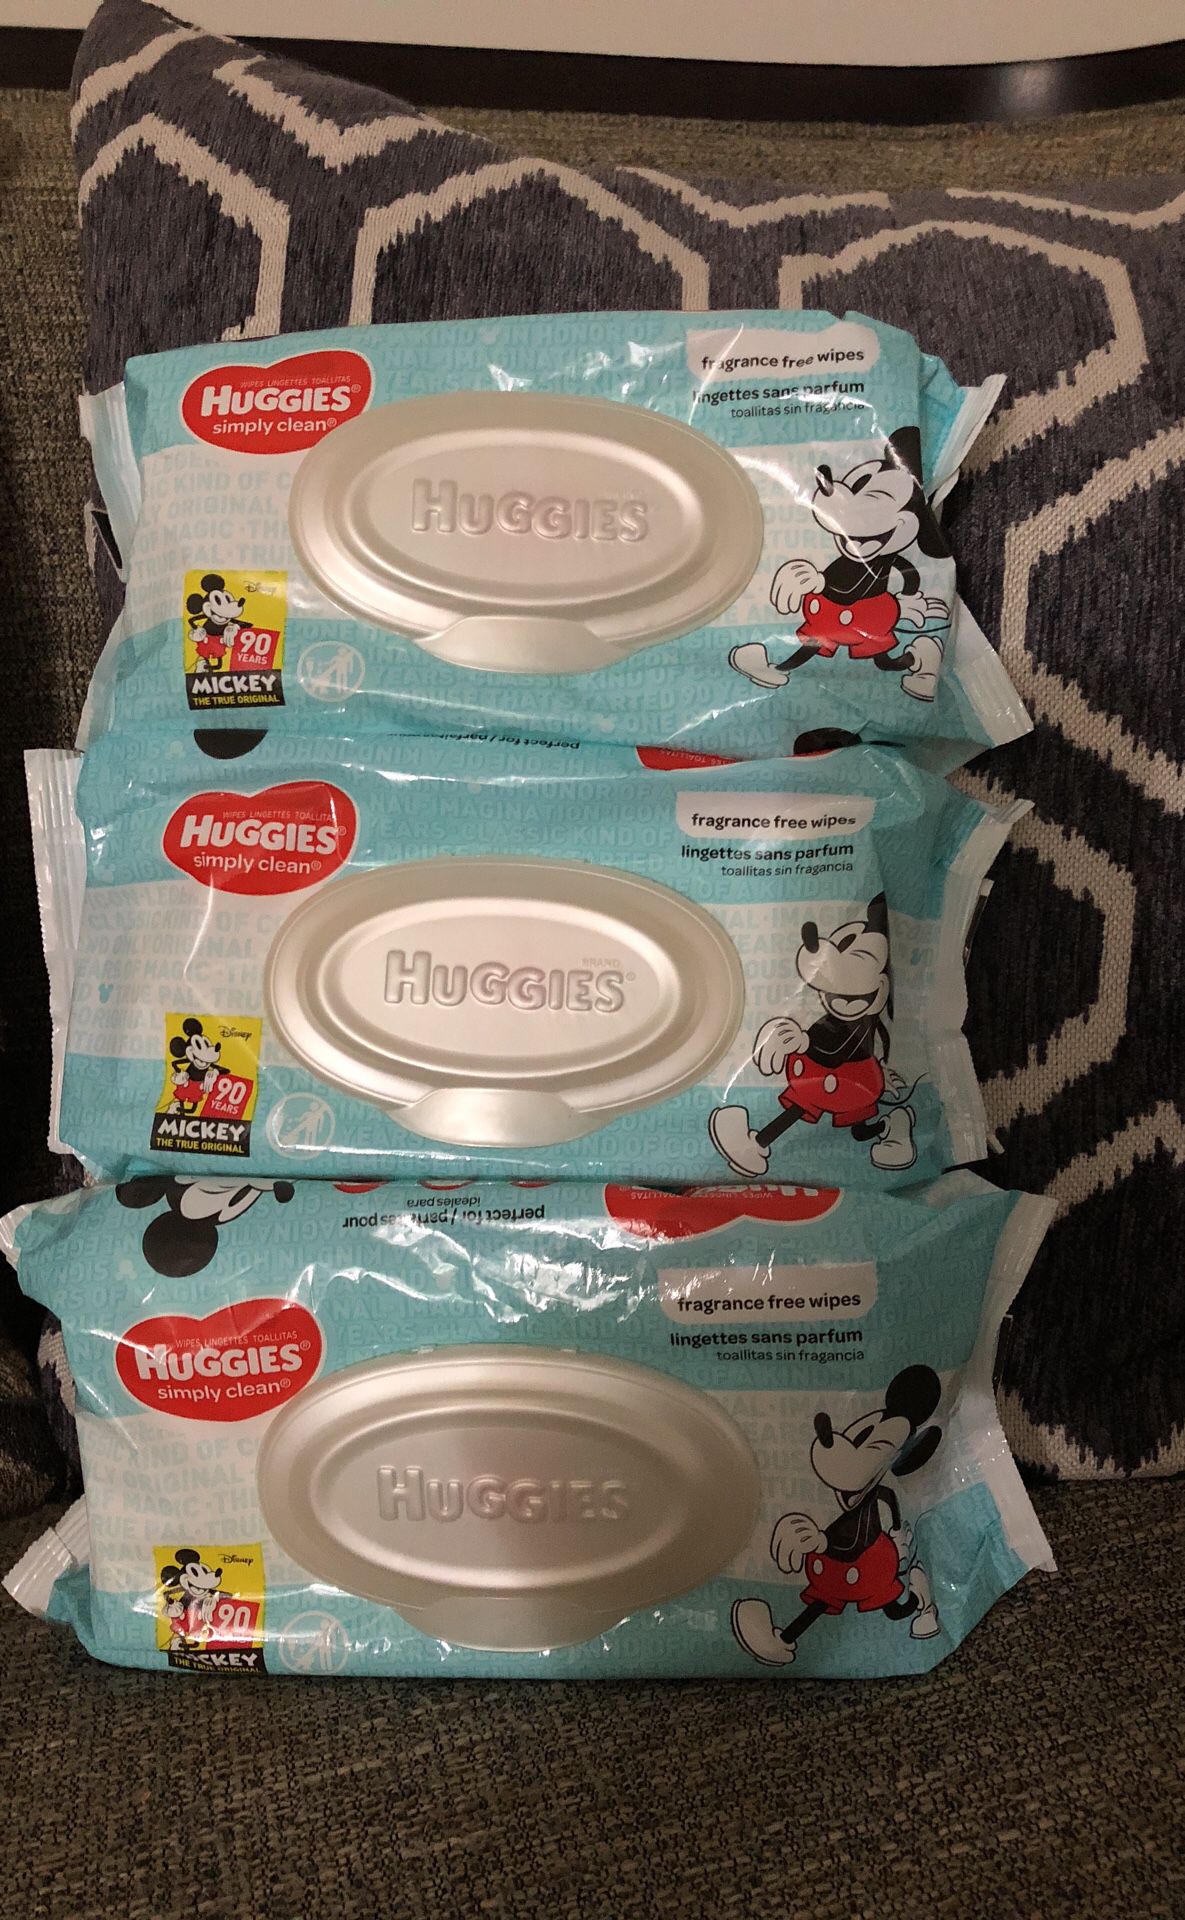 Not available 3 packs of Huggies Wipes. Please see all the pictures and read the description